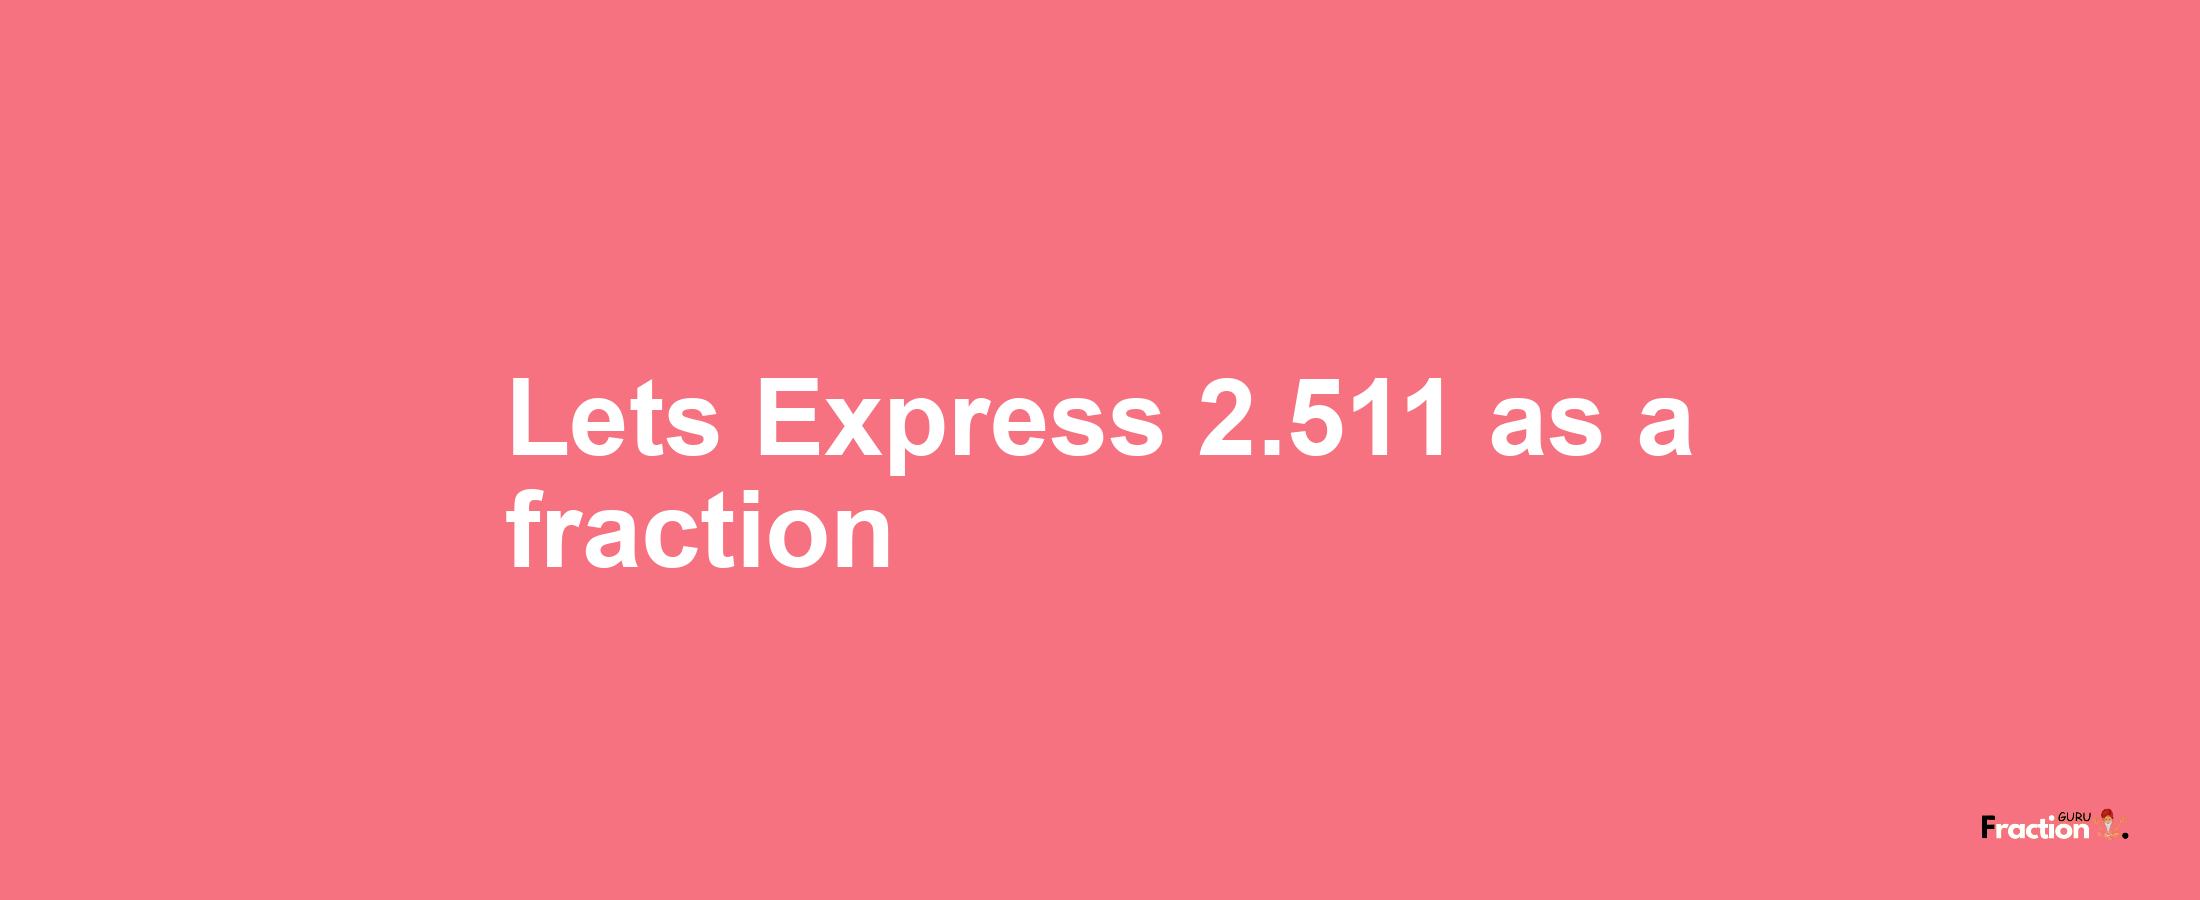 Lets Express 2.511 as afraction